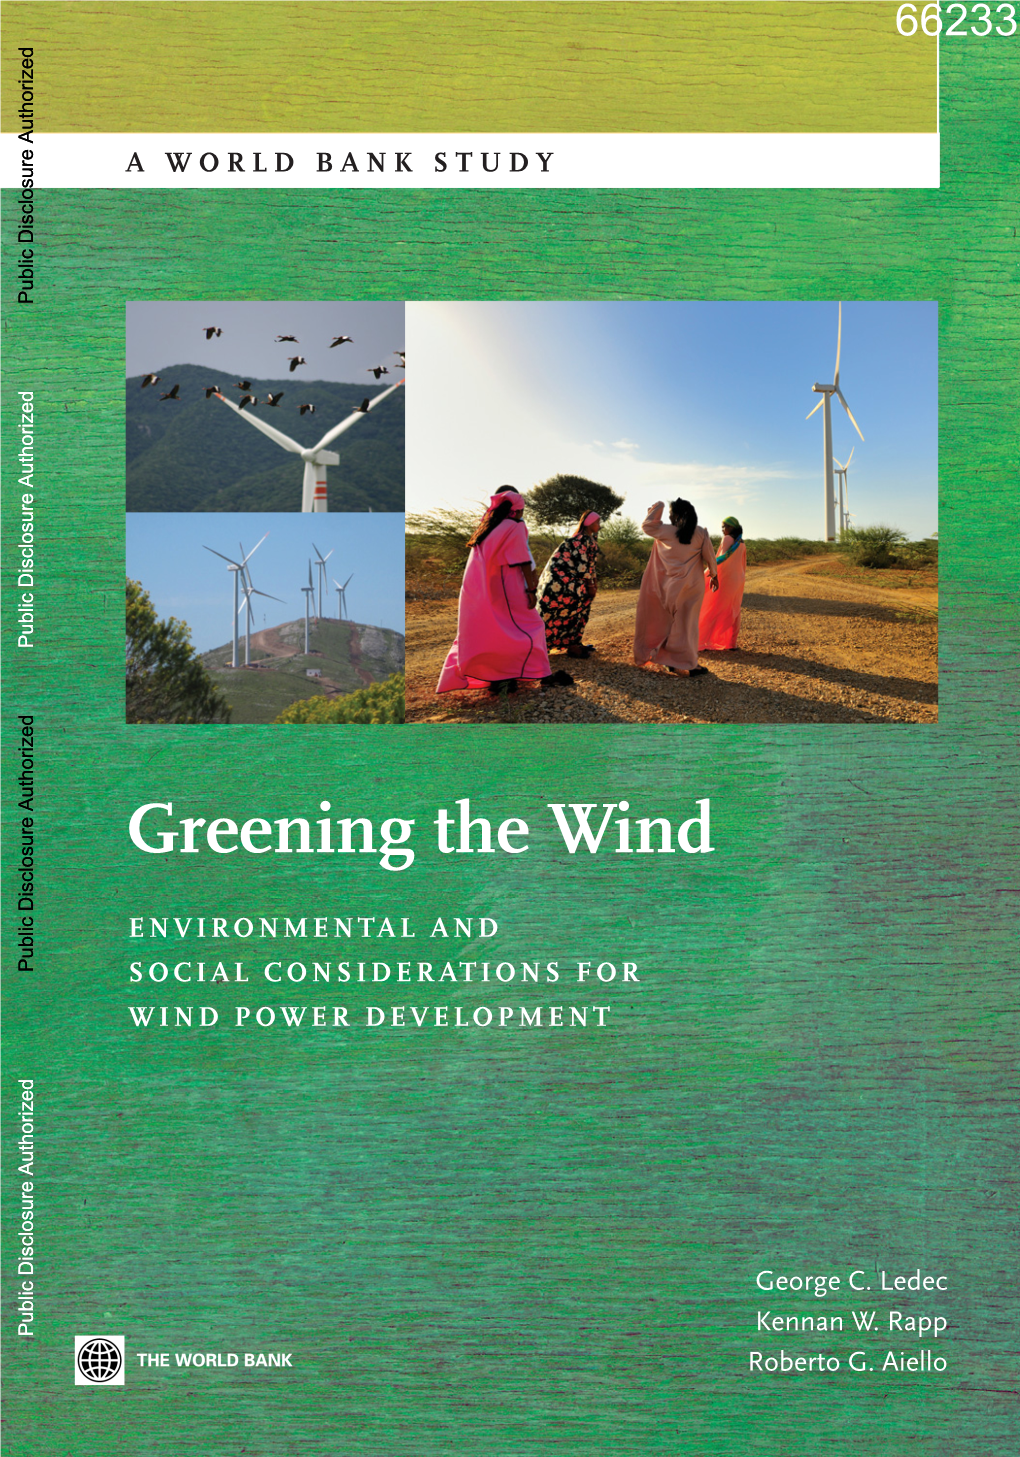 Managing the Social Impacts of Wind Power